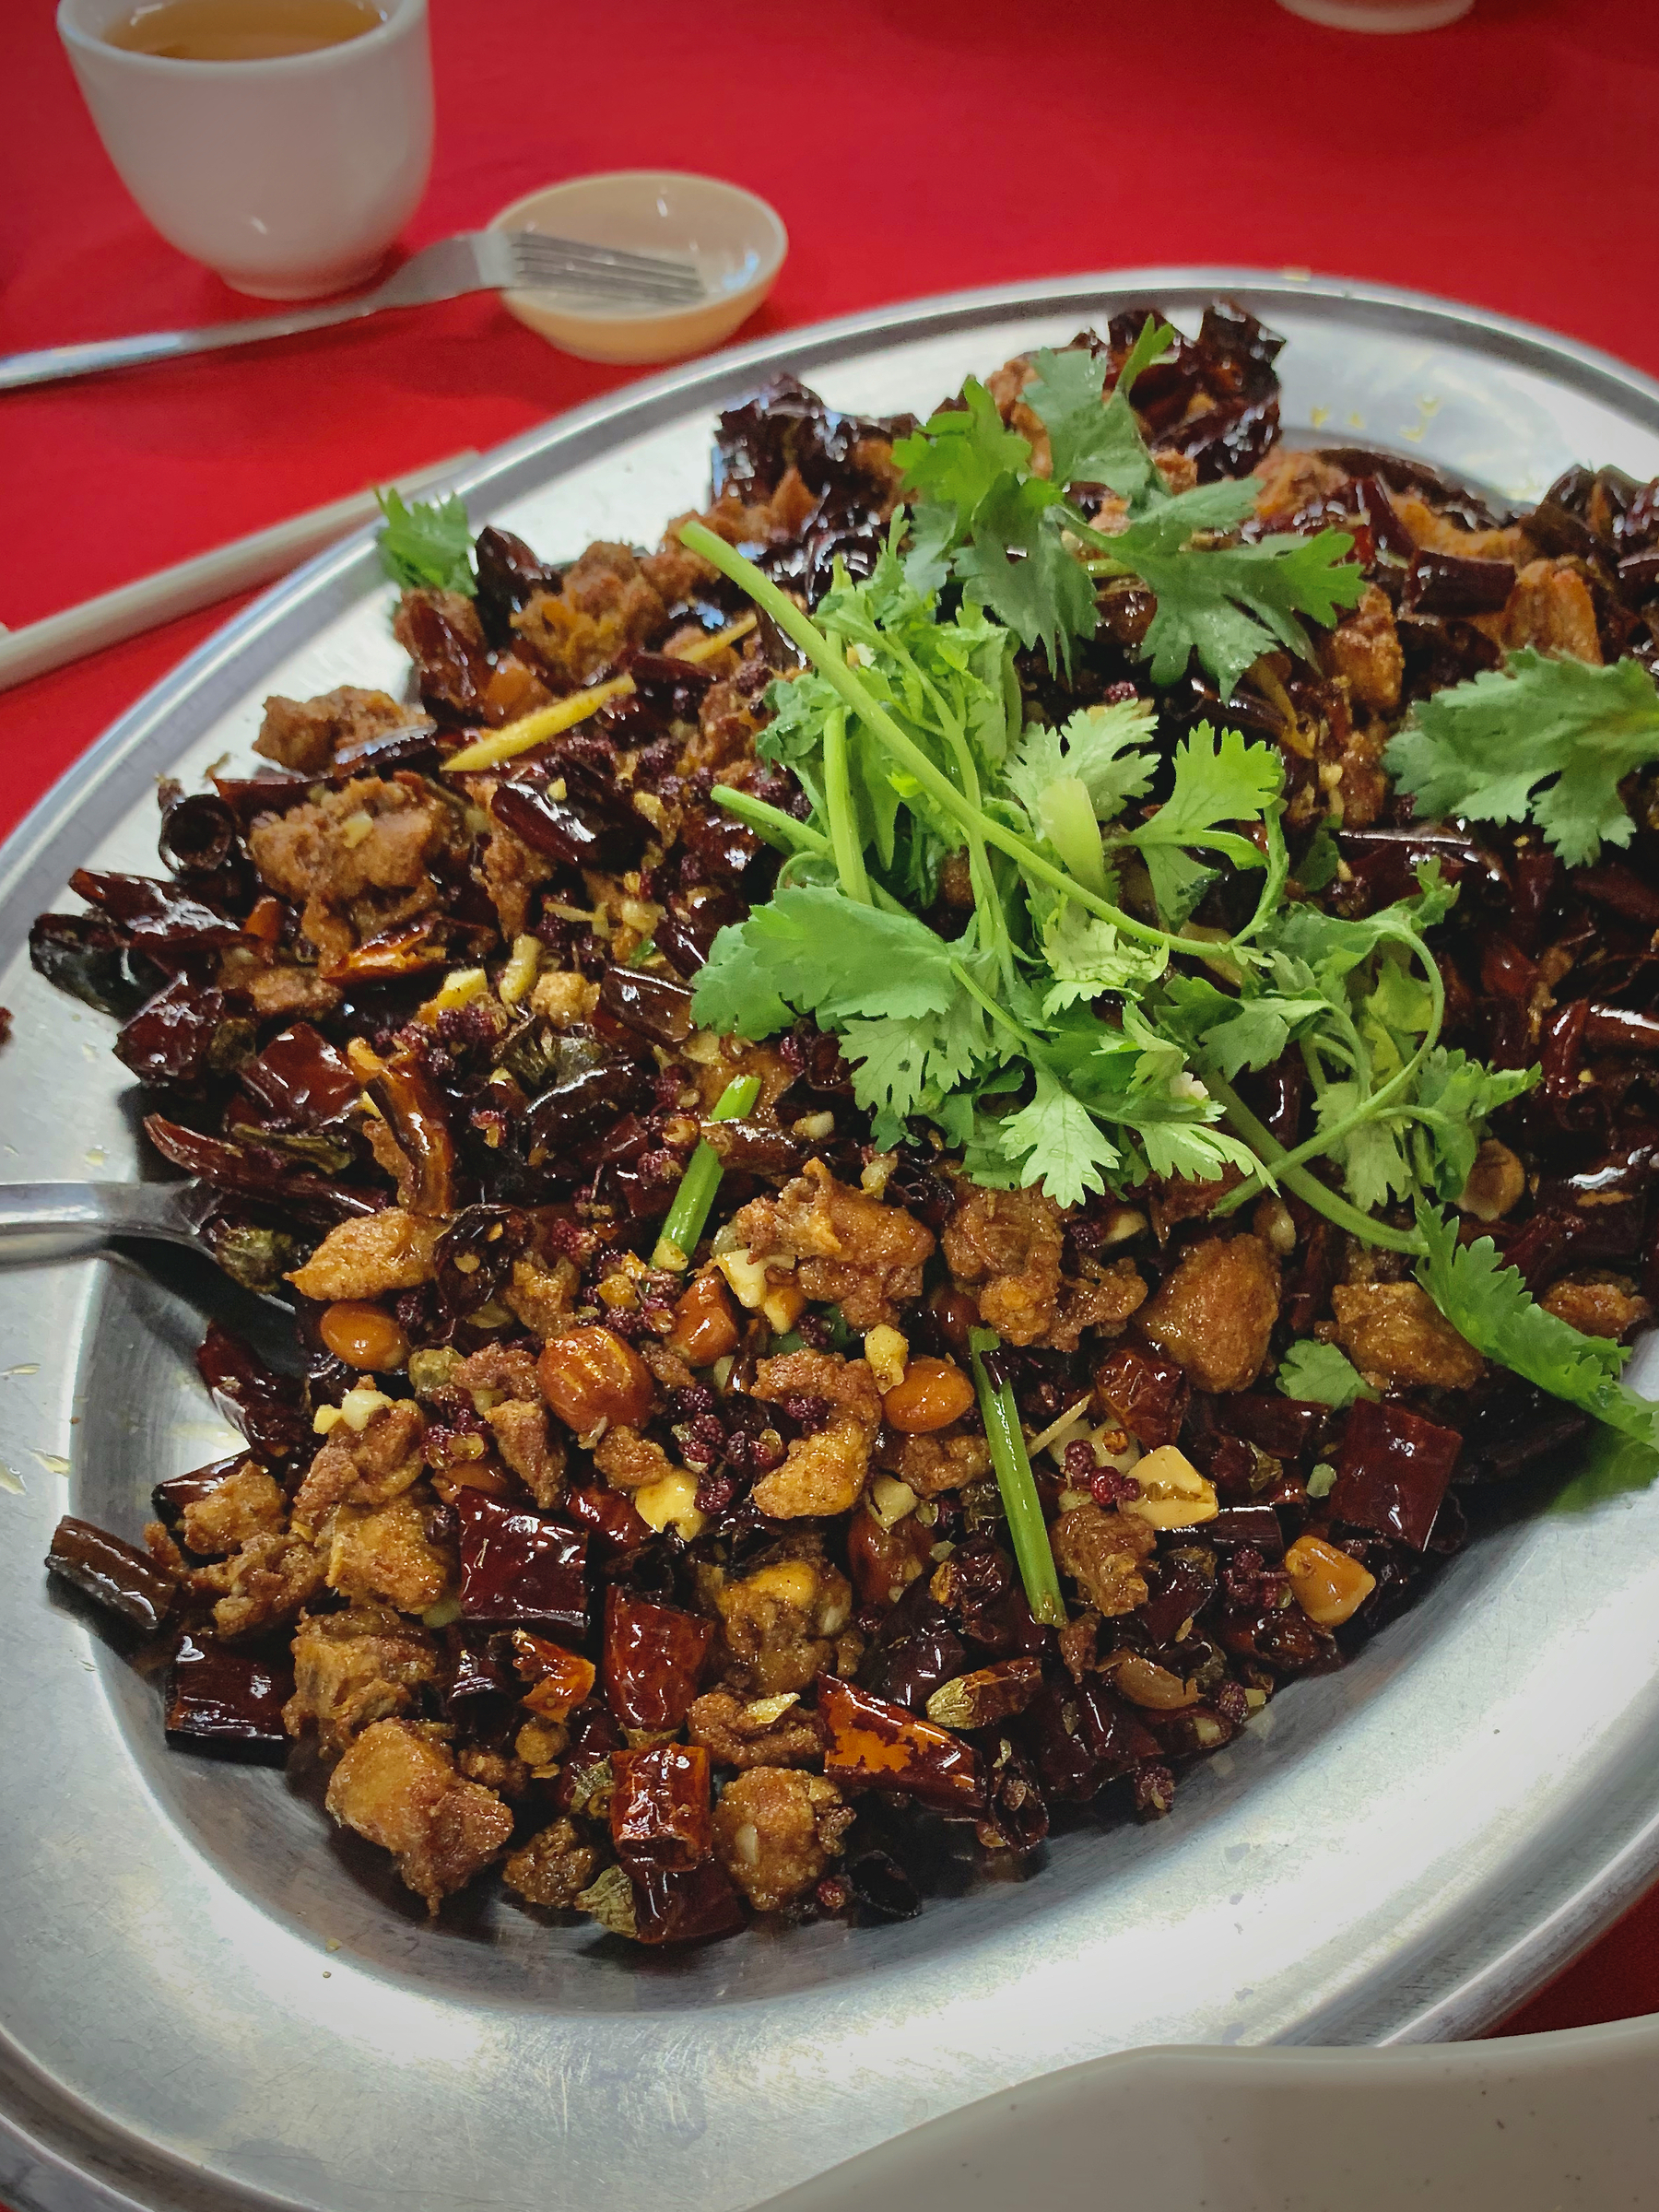 Fried chicken tossed with some dry red chillies and sichuan pepper